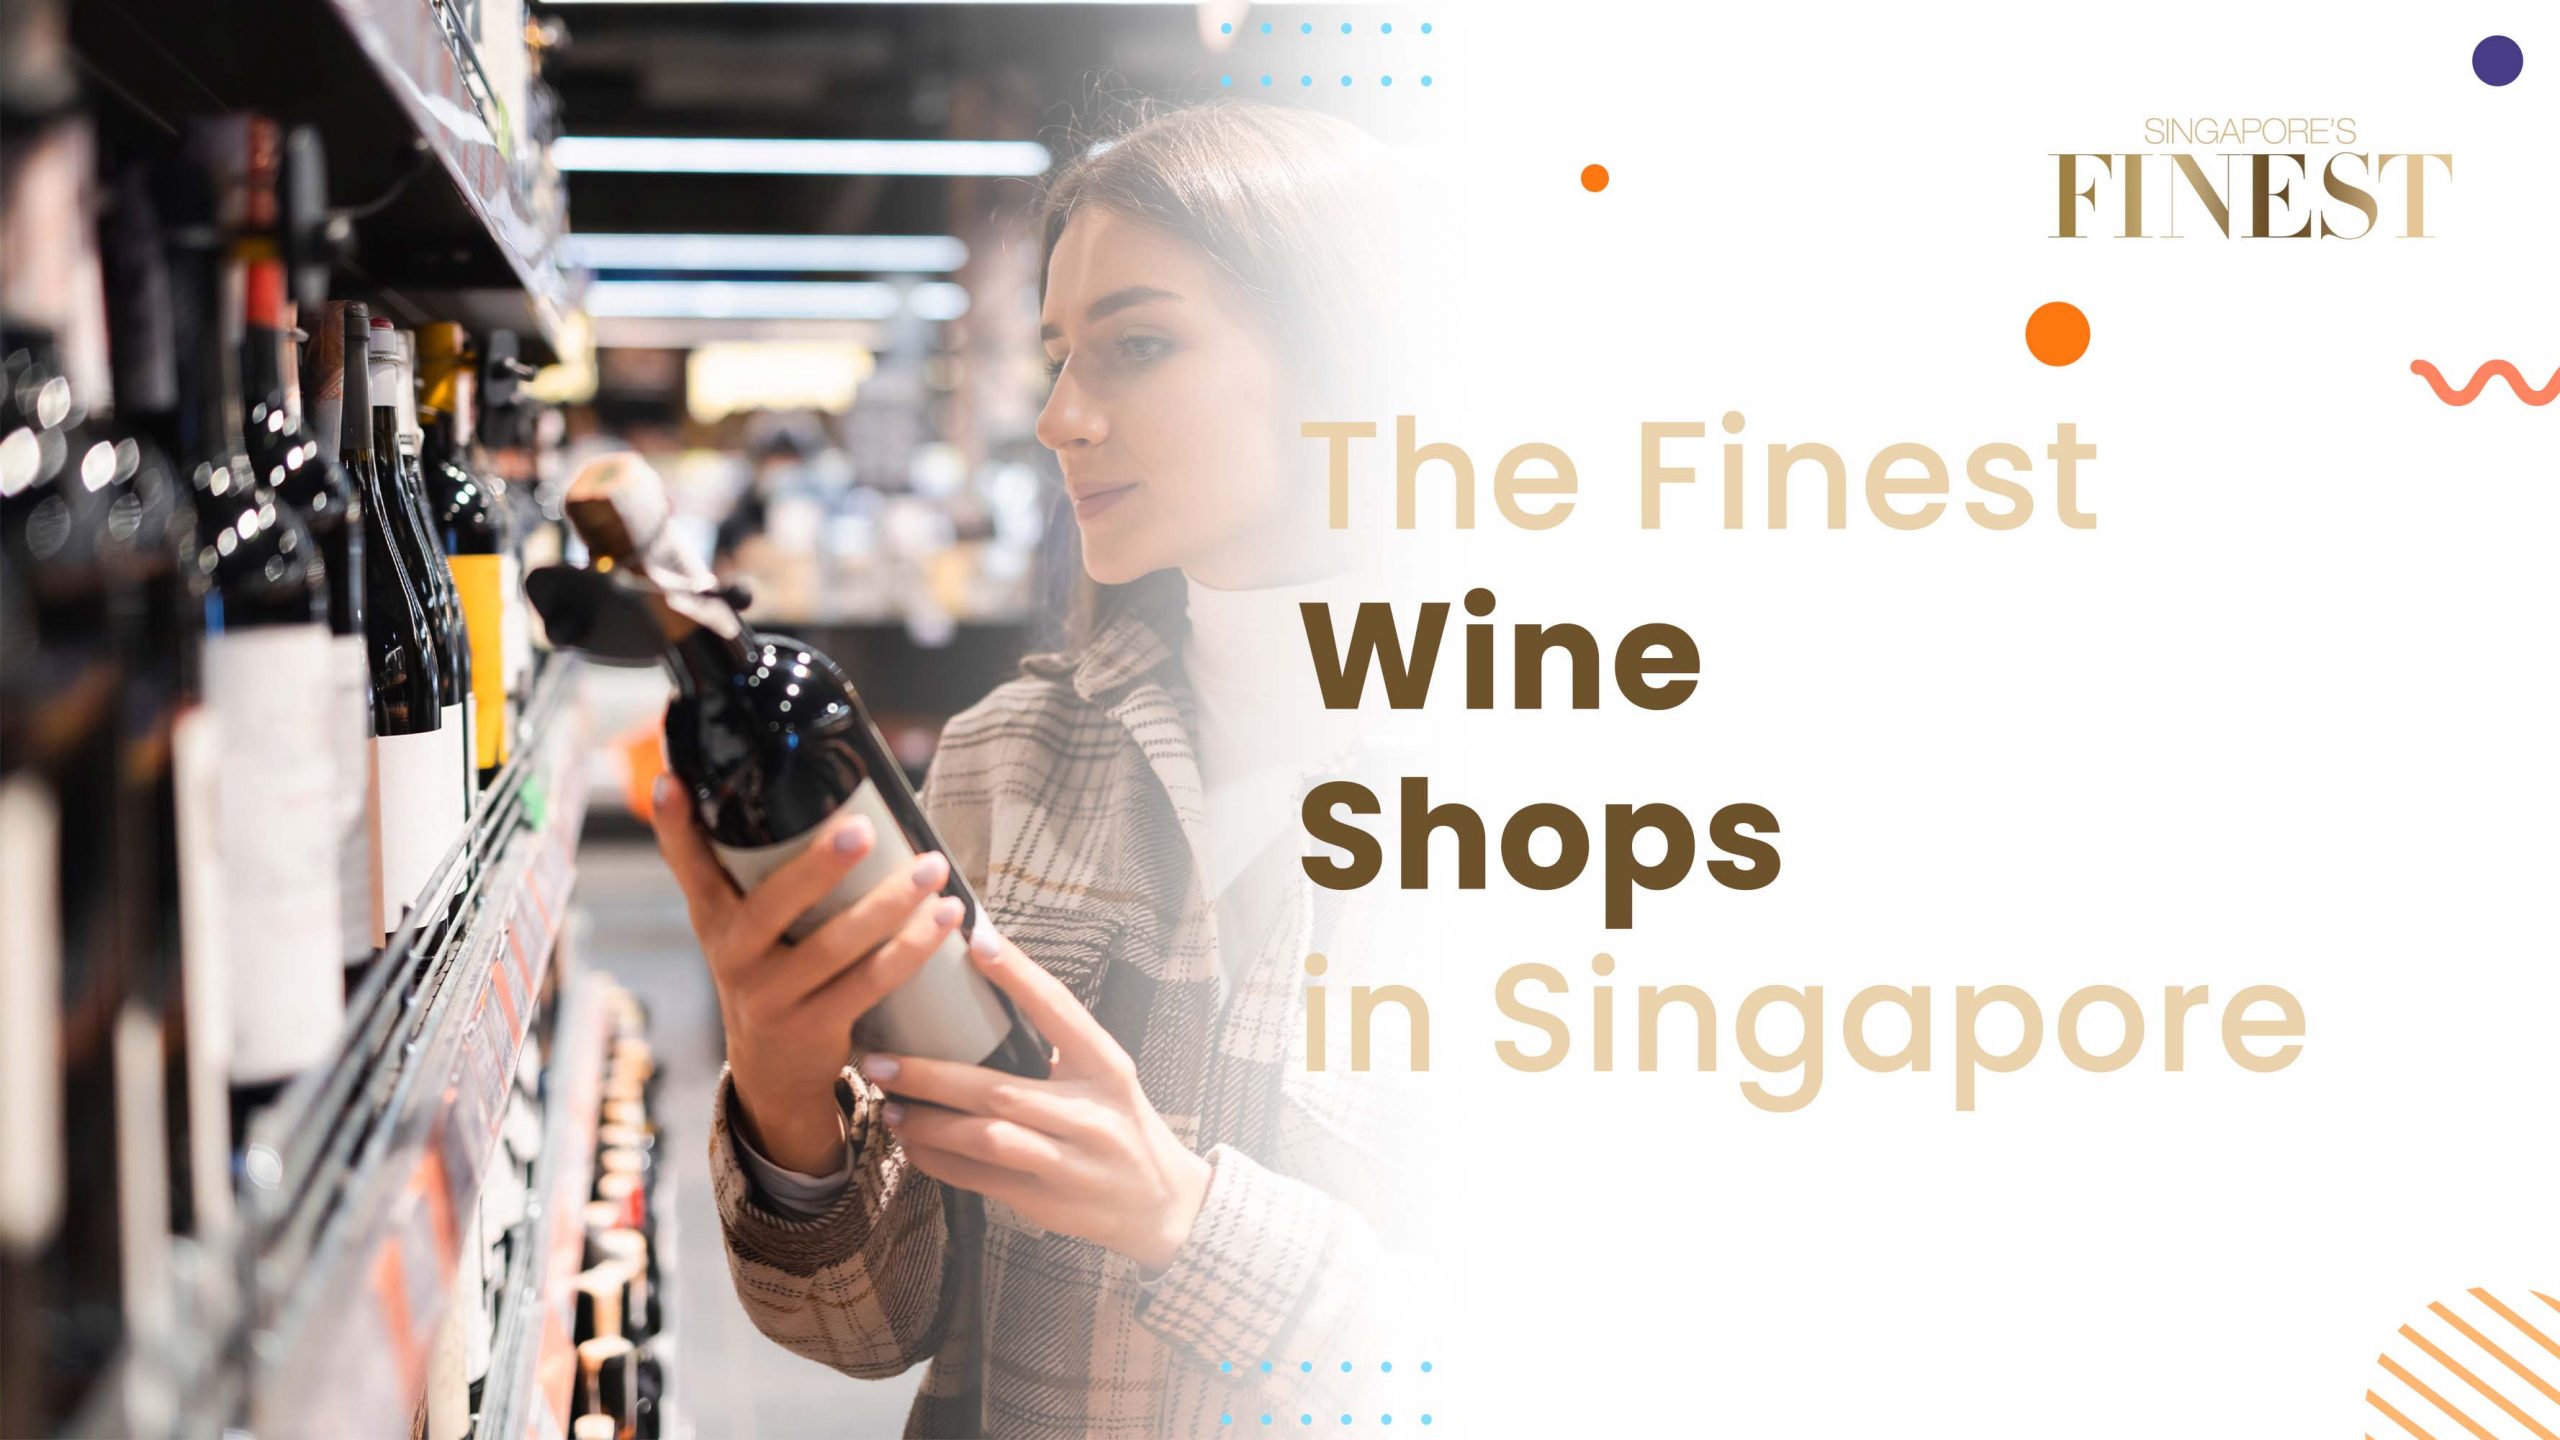 The Finest Wine Shops in Singapore